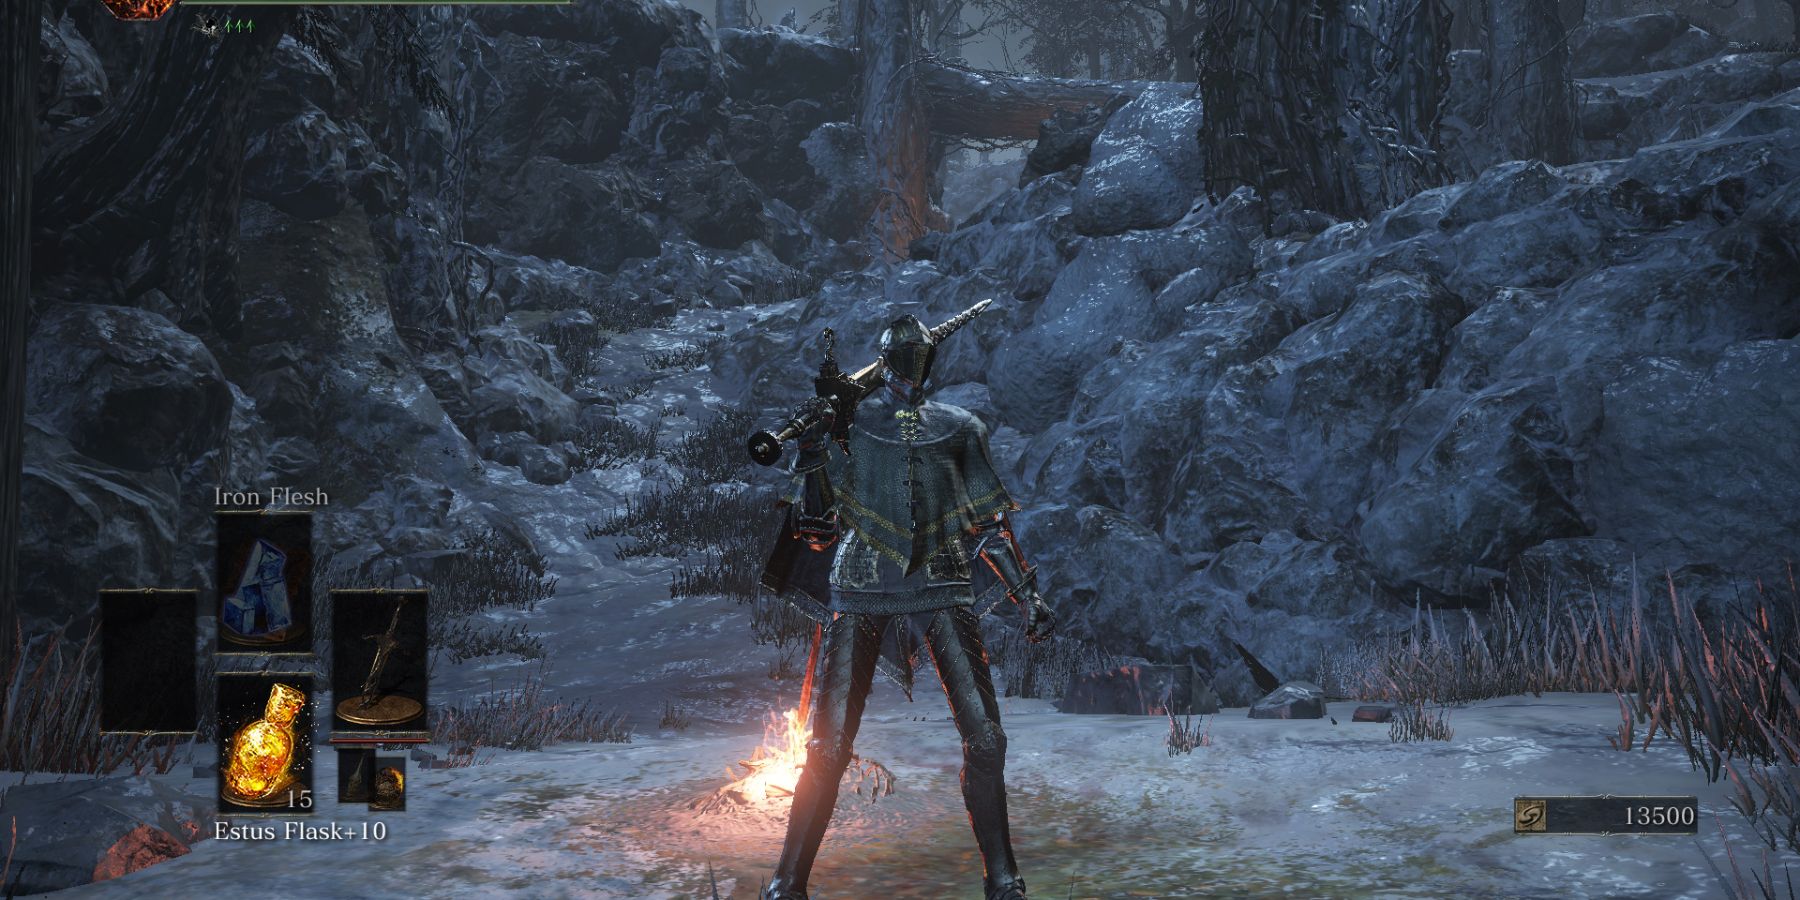 The player is standing next to a bonfire while wearing Vilhelm's set in Dark Souls 3.